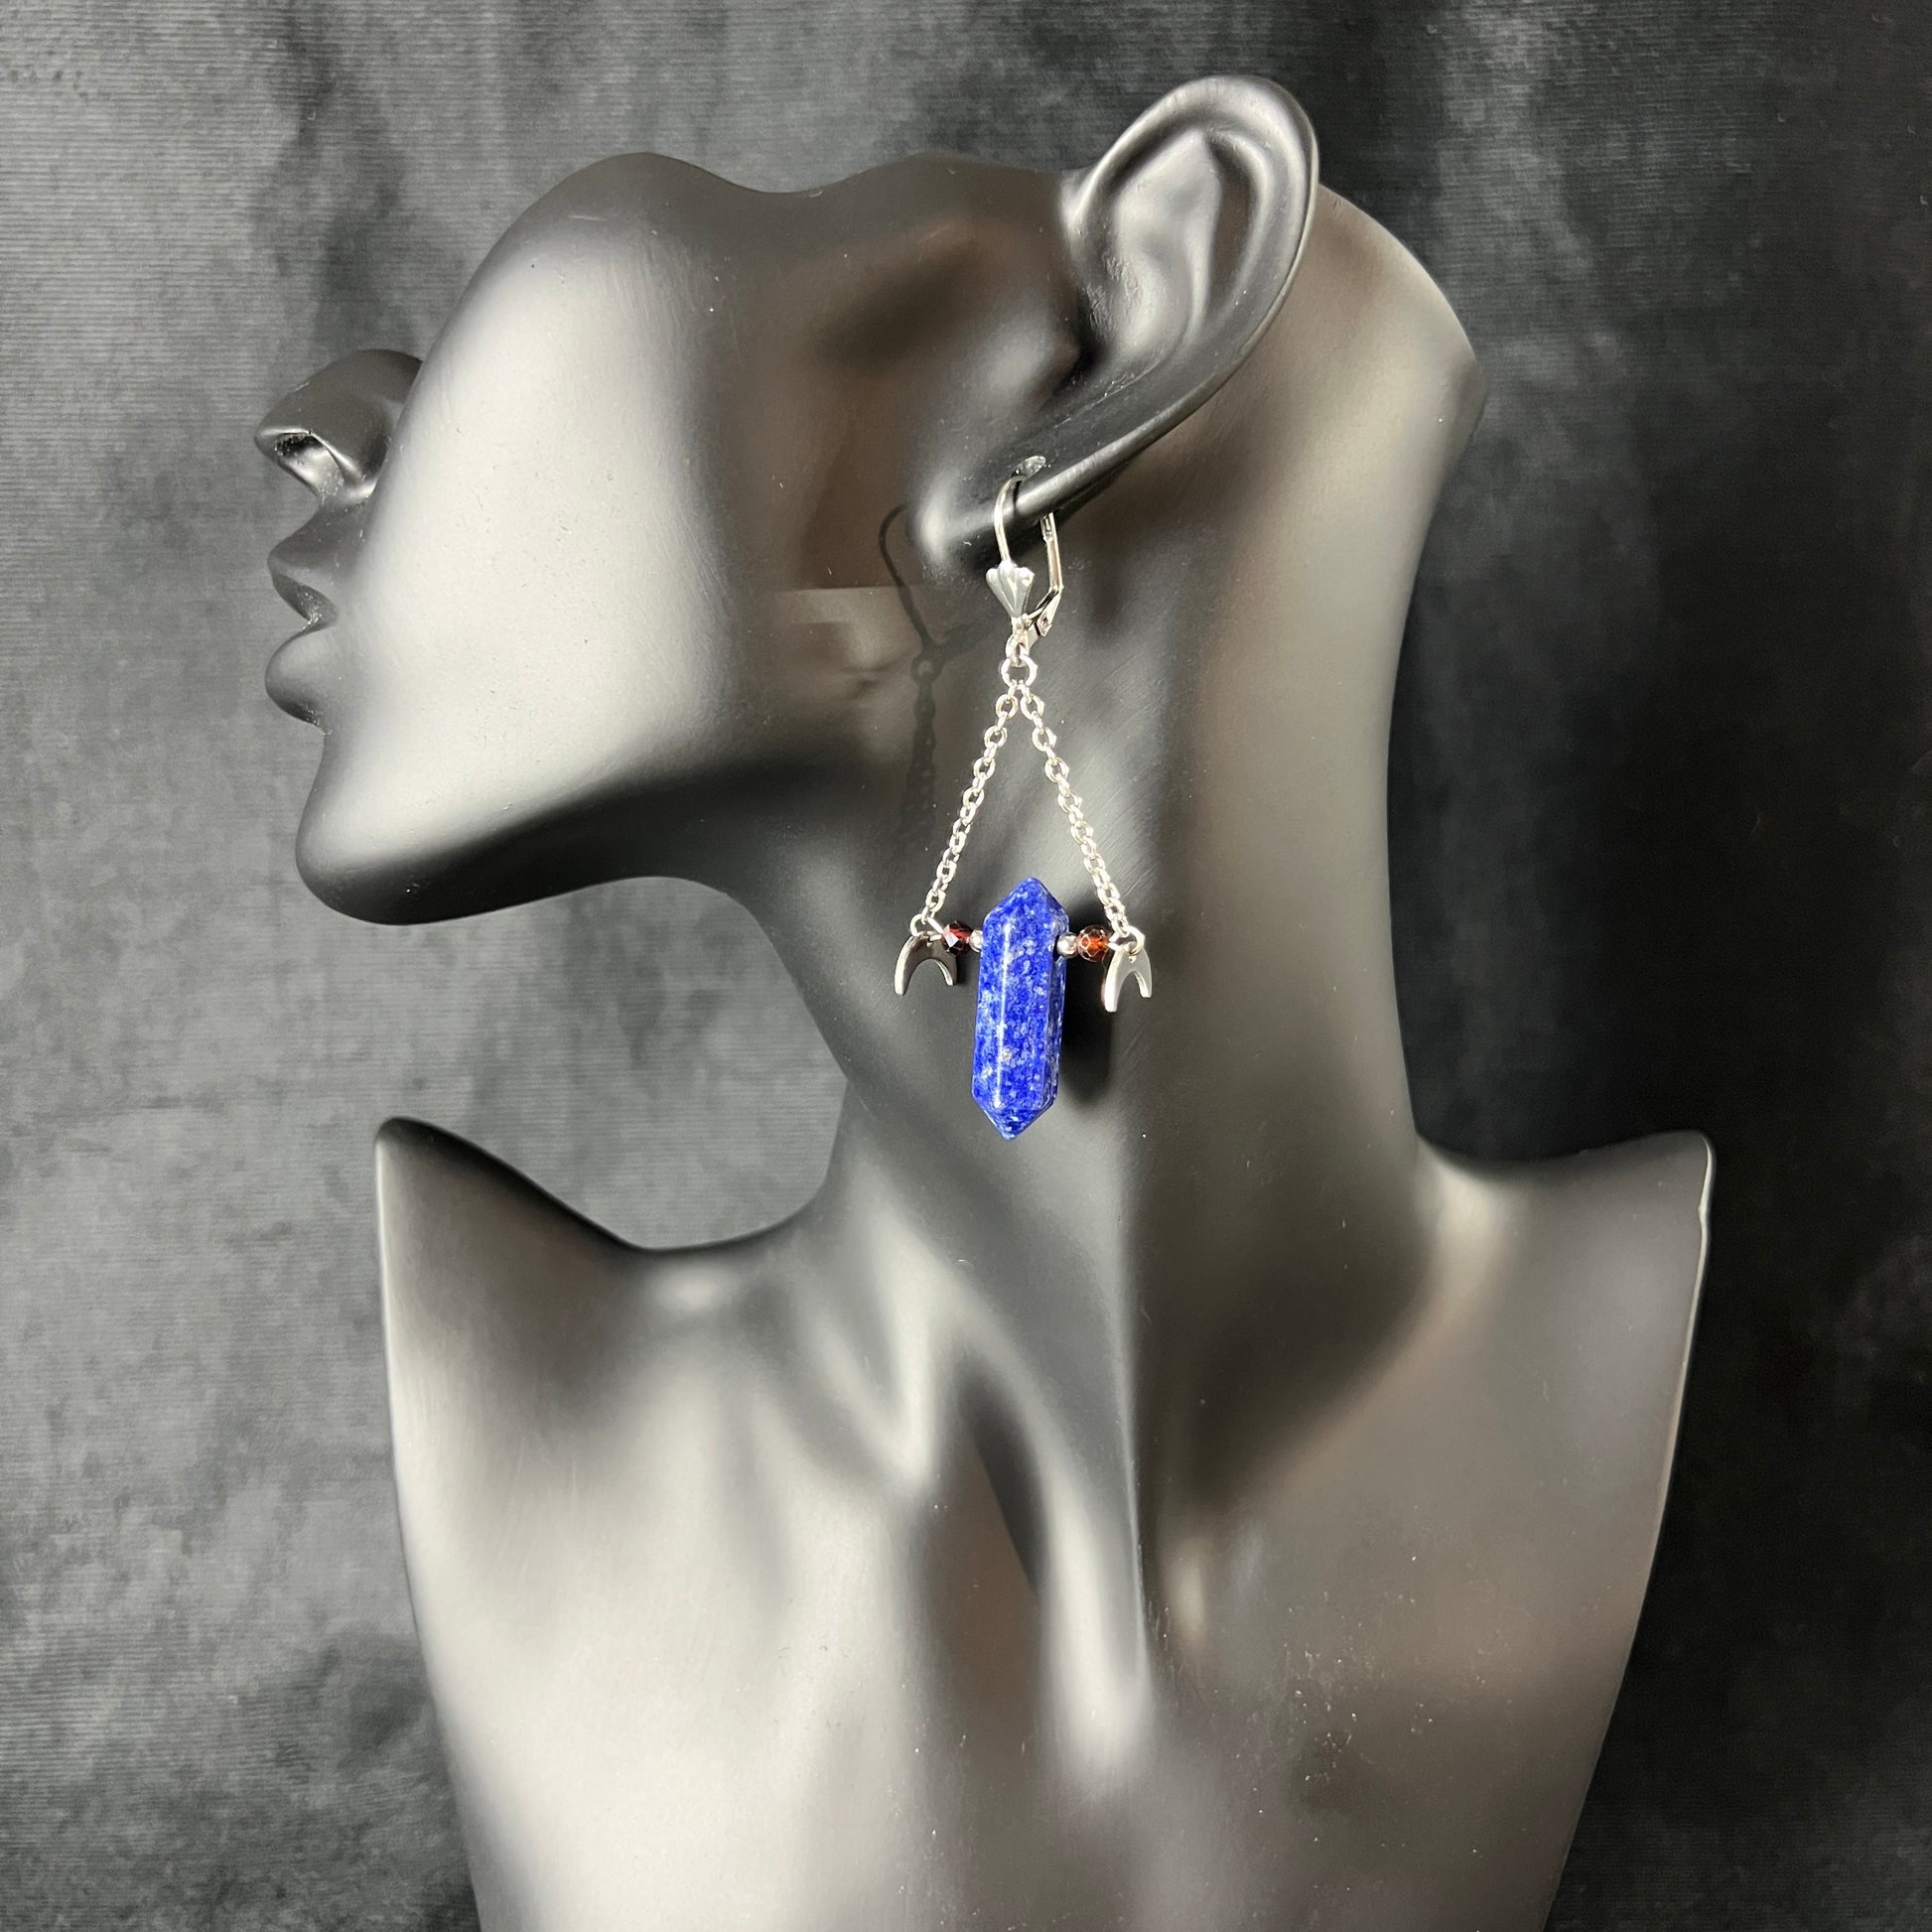 Lapis lazuli garnet and stainless steel gemstone earrings with Moon crescent Baguette Magick